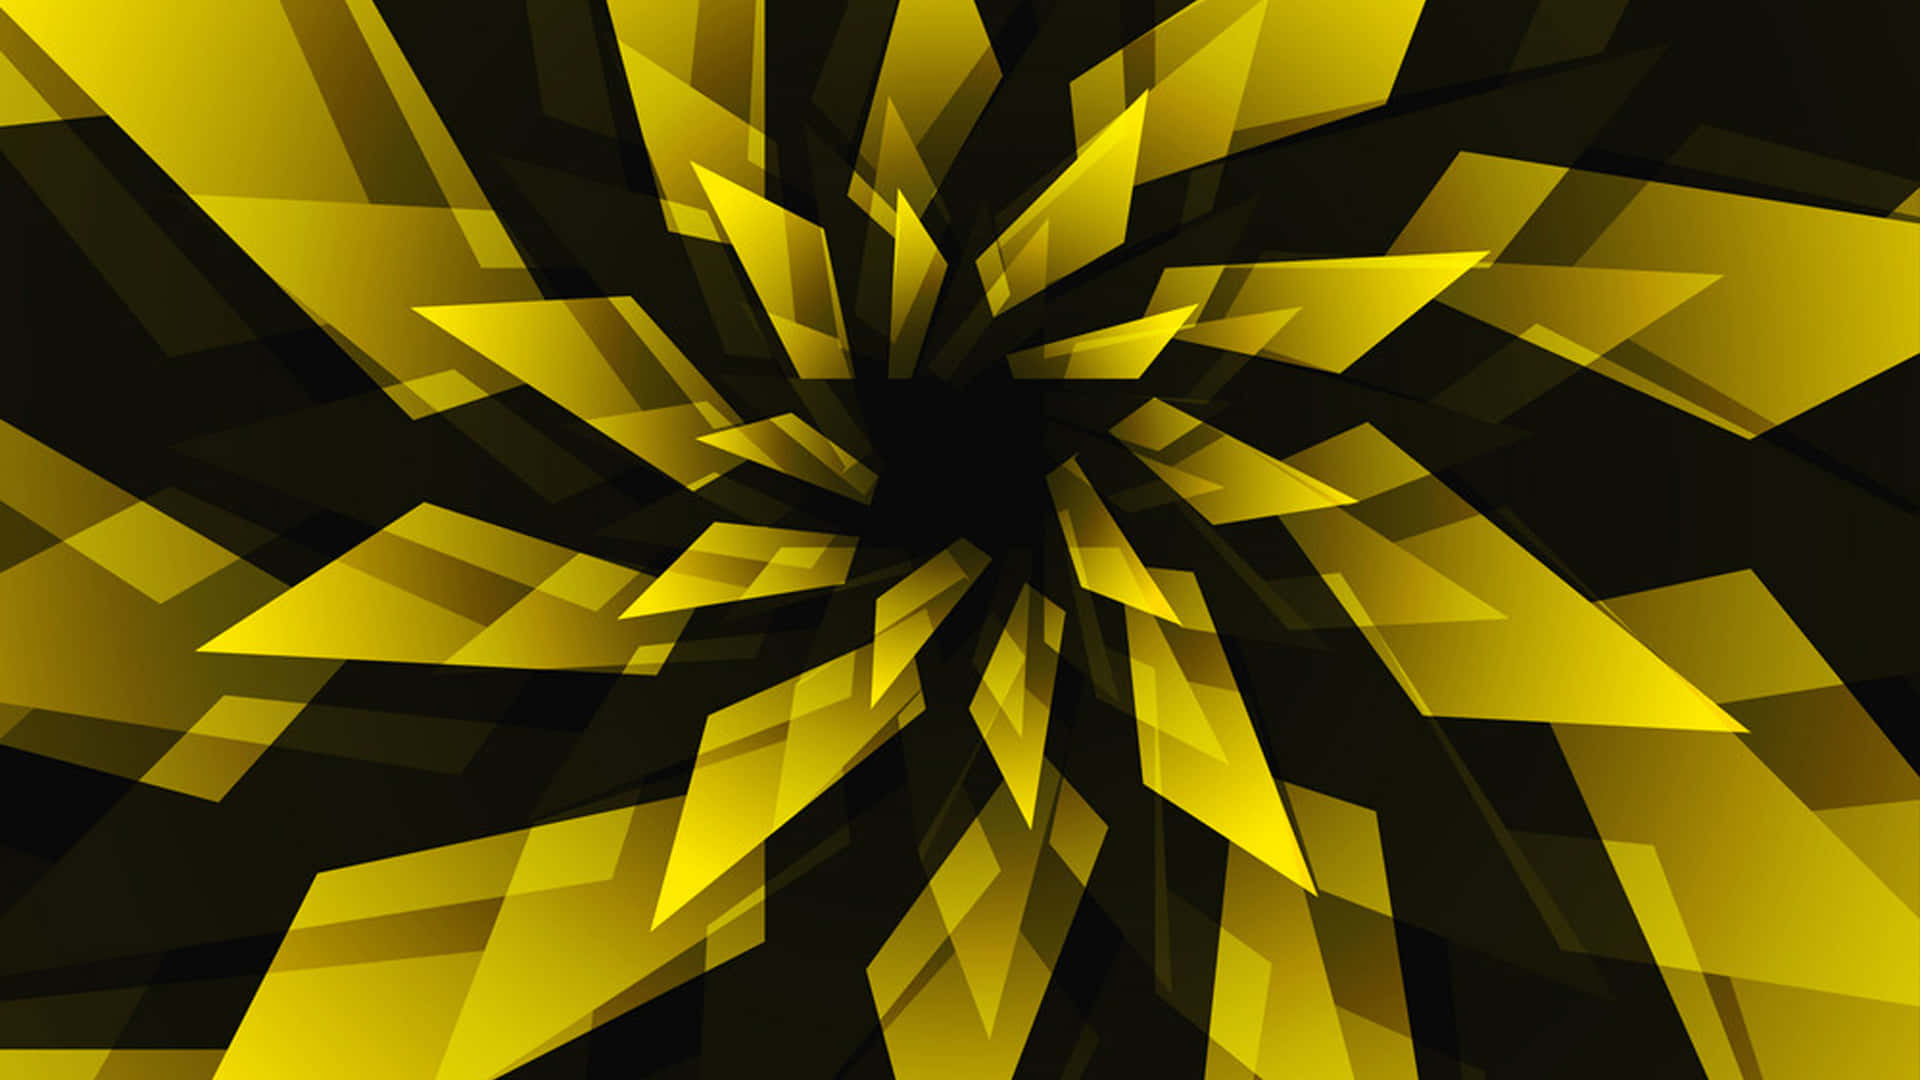 Abstract Artistry - A Blend of Black and Yellow Wallpaper